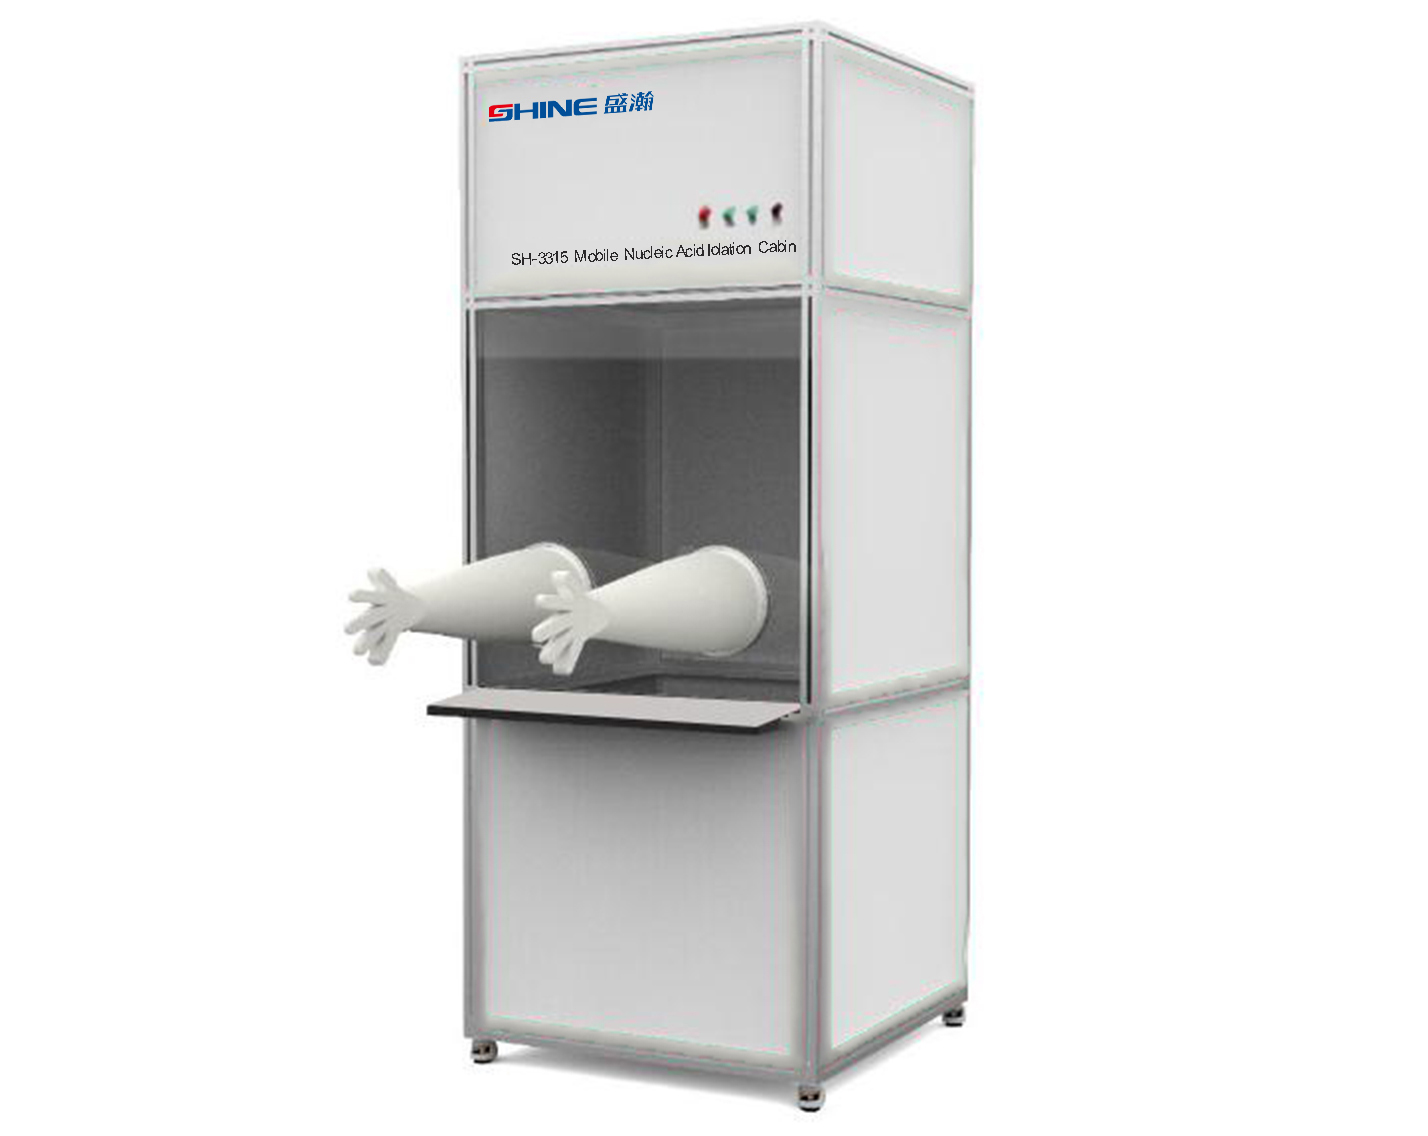 Mobile collection nucleic acid iolation cabin